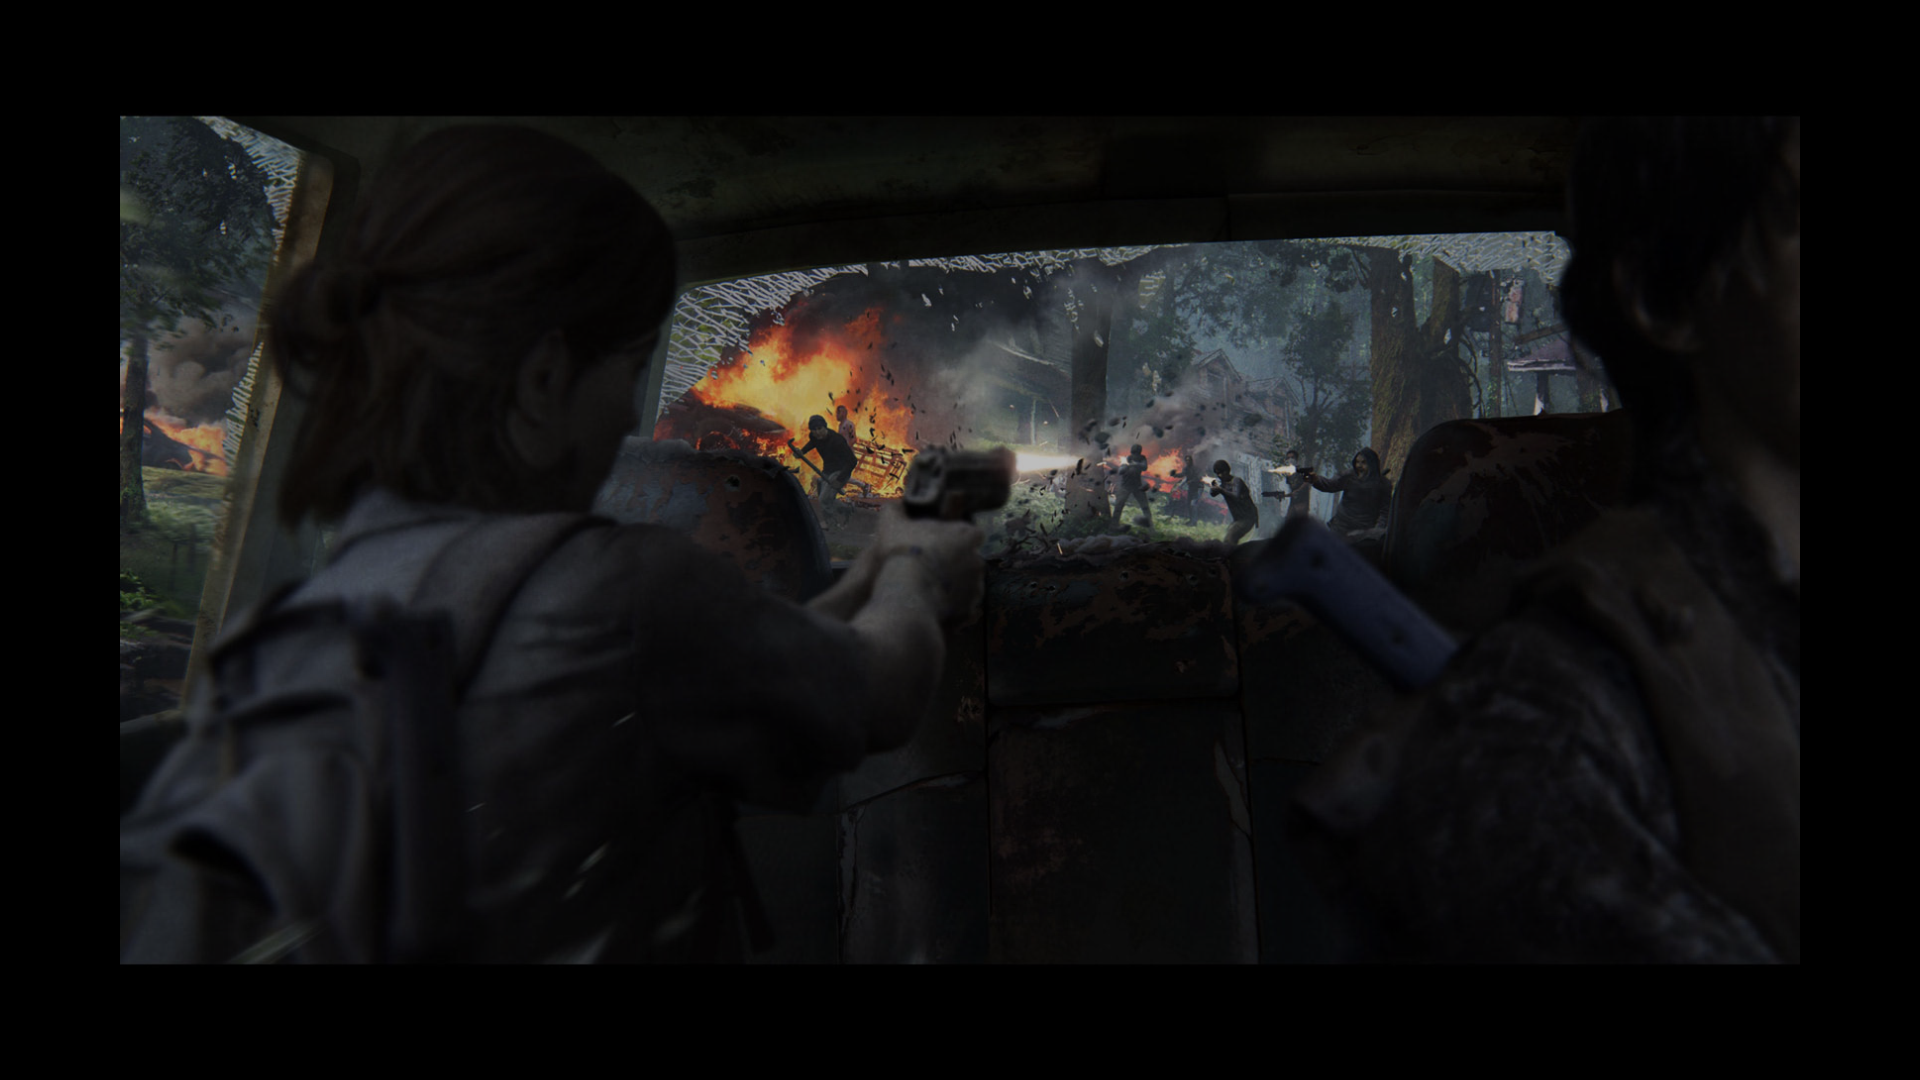 General 1920x1080 The Last of Us 2 video games artwork post apocalypse The Last of Us Naughty Dog PlayStation 4 firefight Ellie Williams video game characters Jesse (The Last of Us 2)